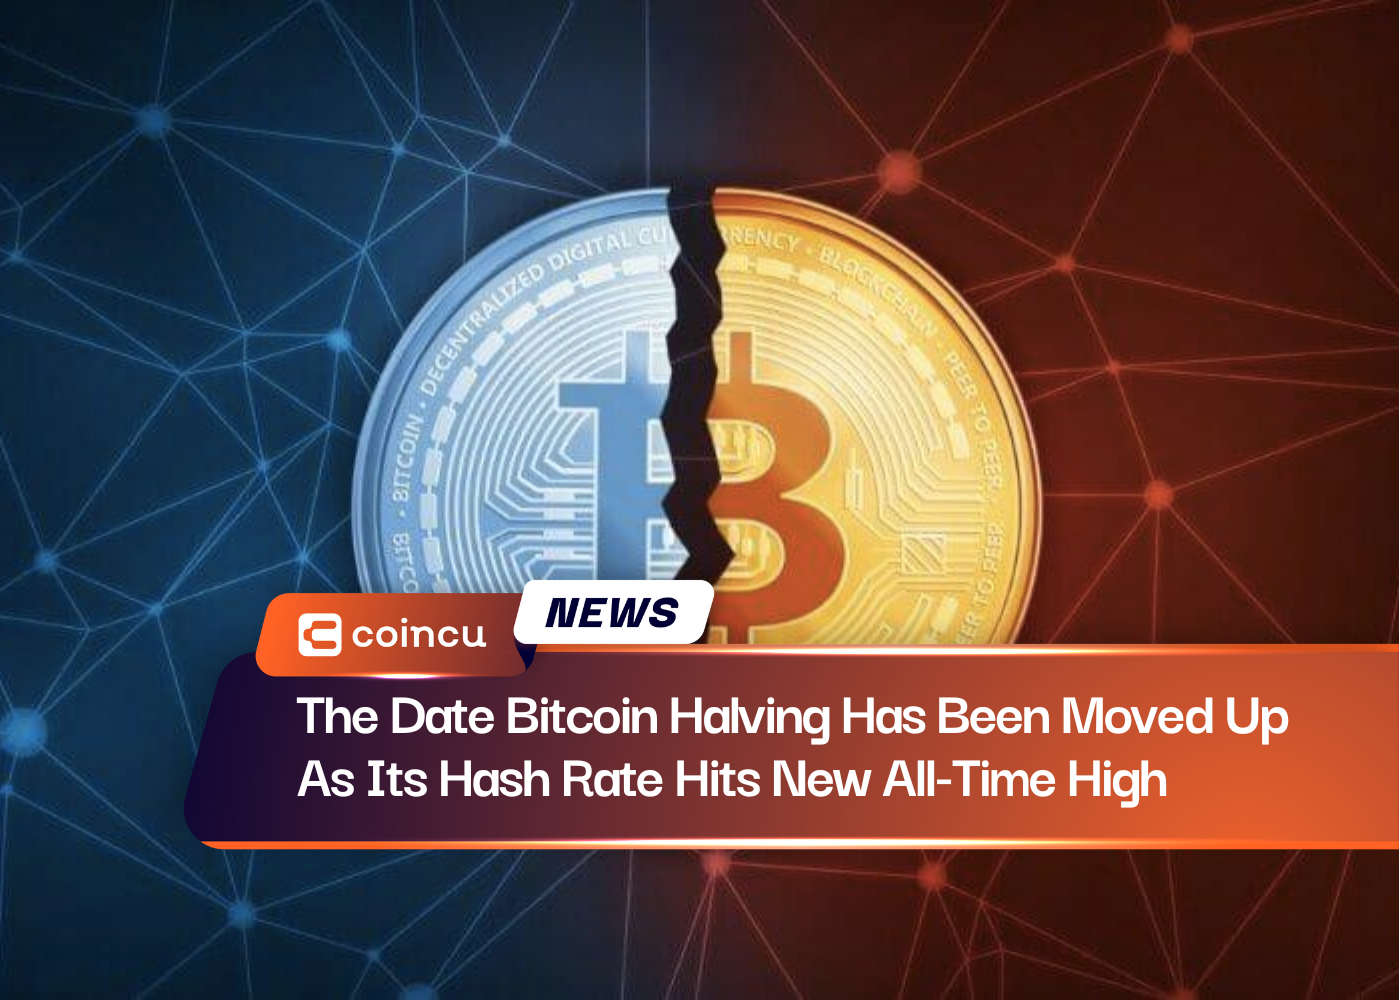 The Date Bitcoin Halving Has Been Moved Up As Its Hash Rate Hits New All-Time High